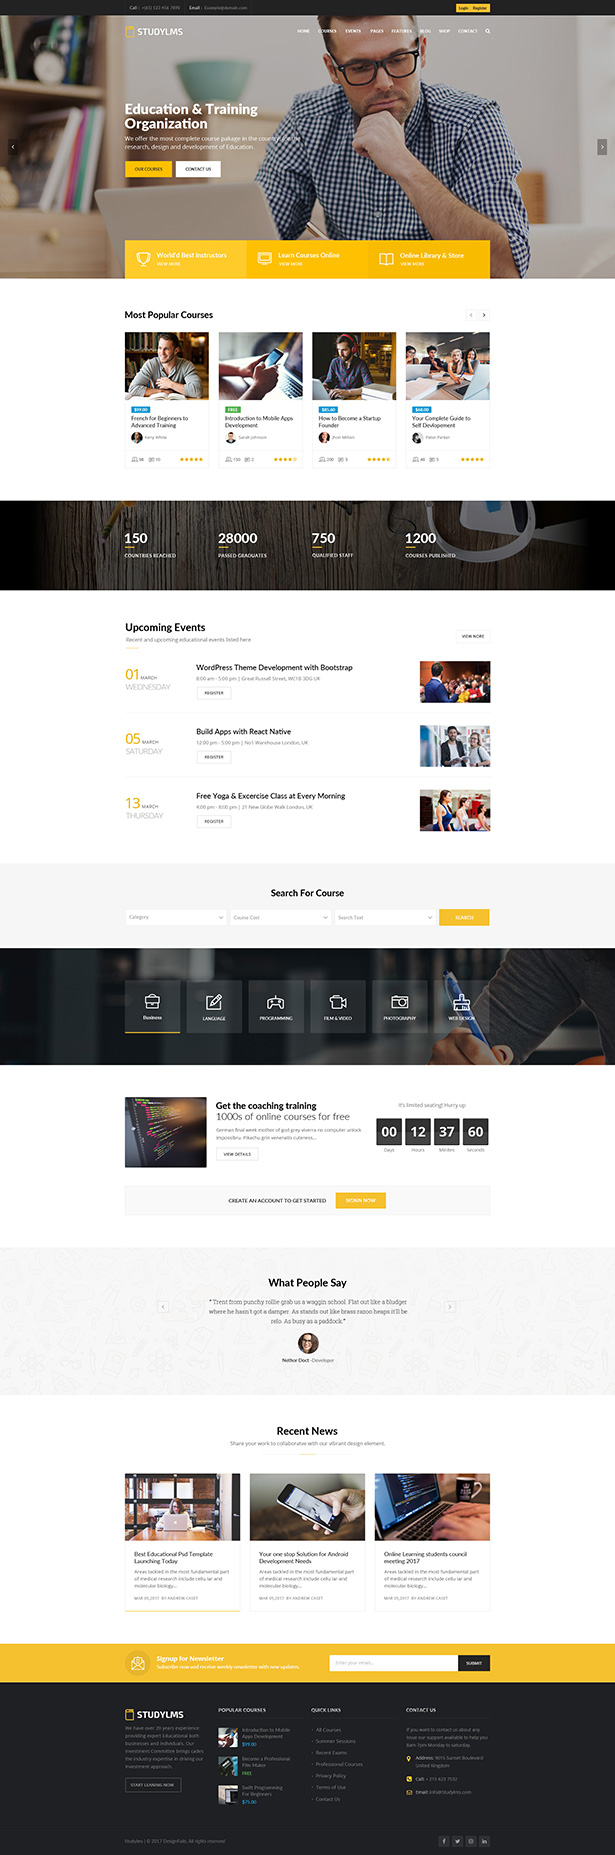 Studylms - Education LMS & Courses HTML Template (Business)